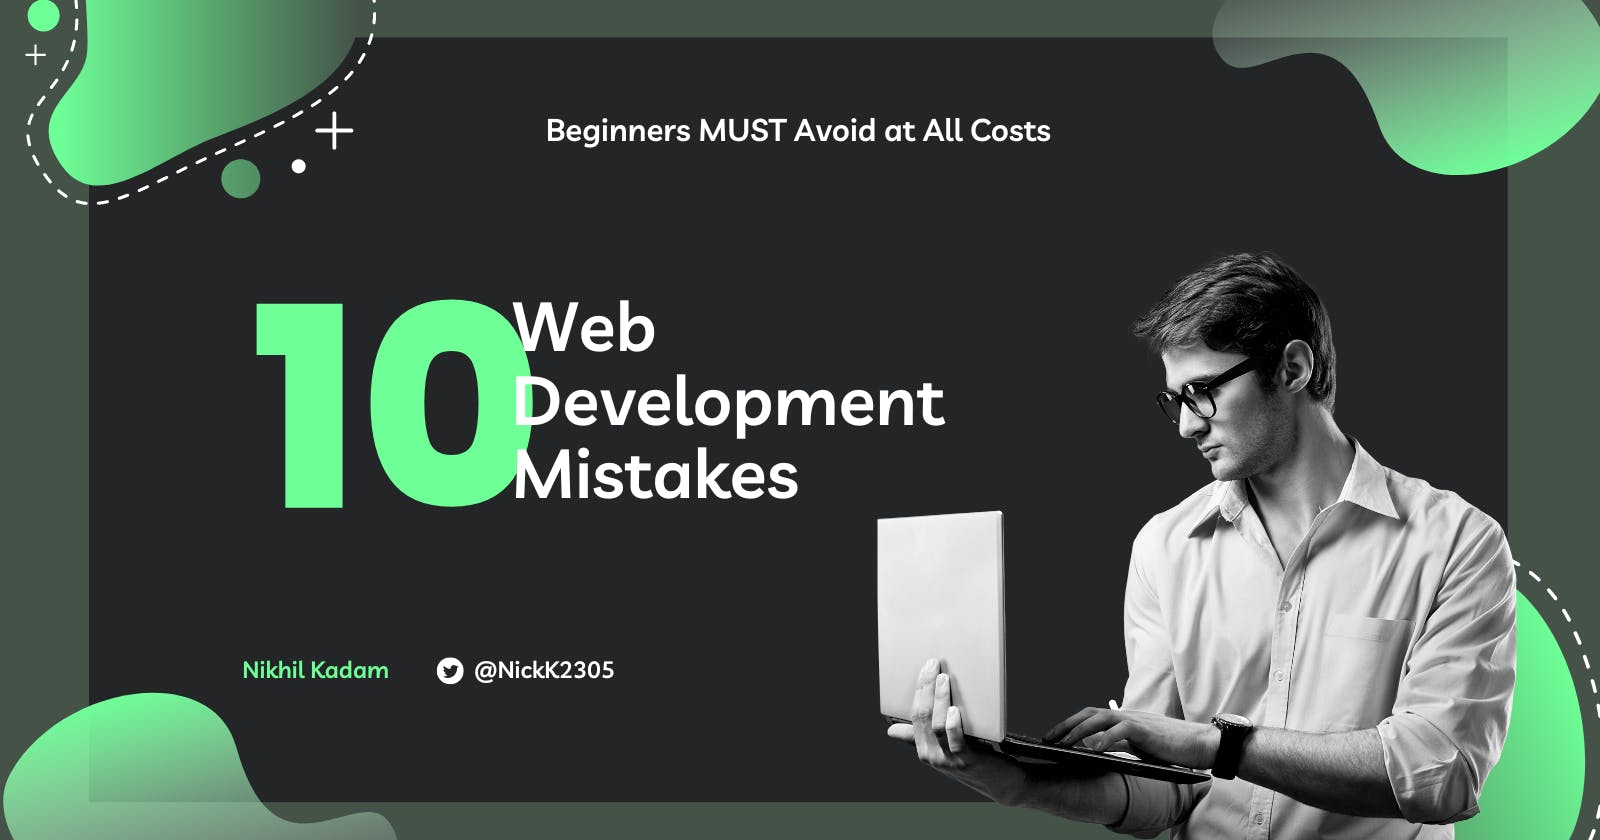 10 Web Development Mistakes Beginners MUST Avoid at All Costs